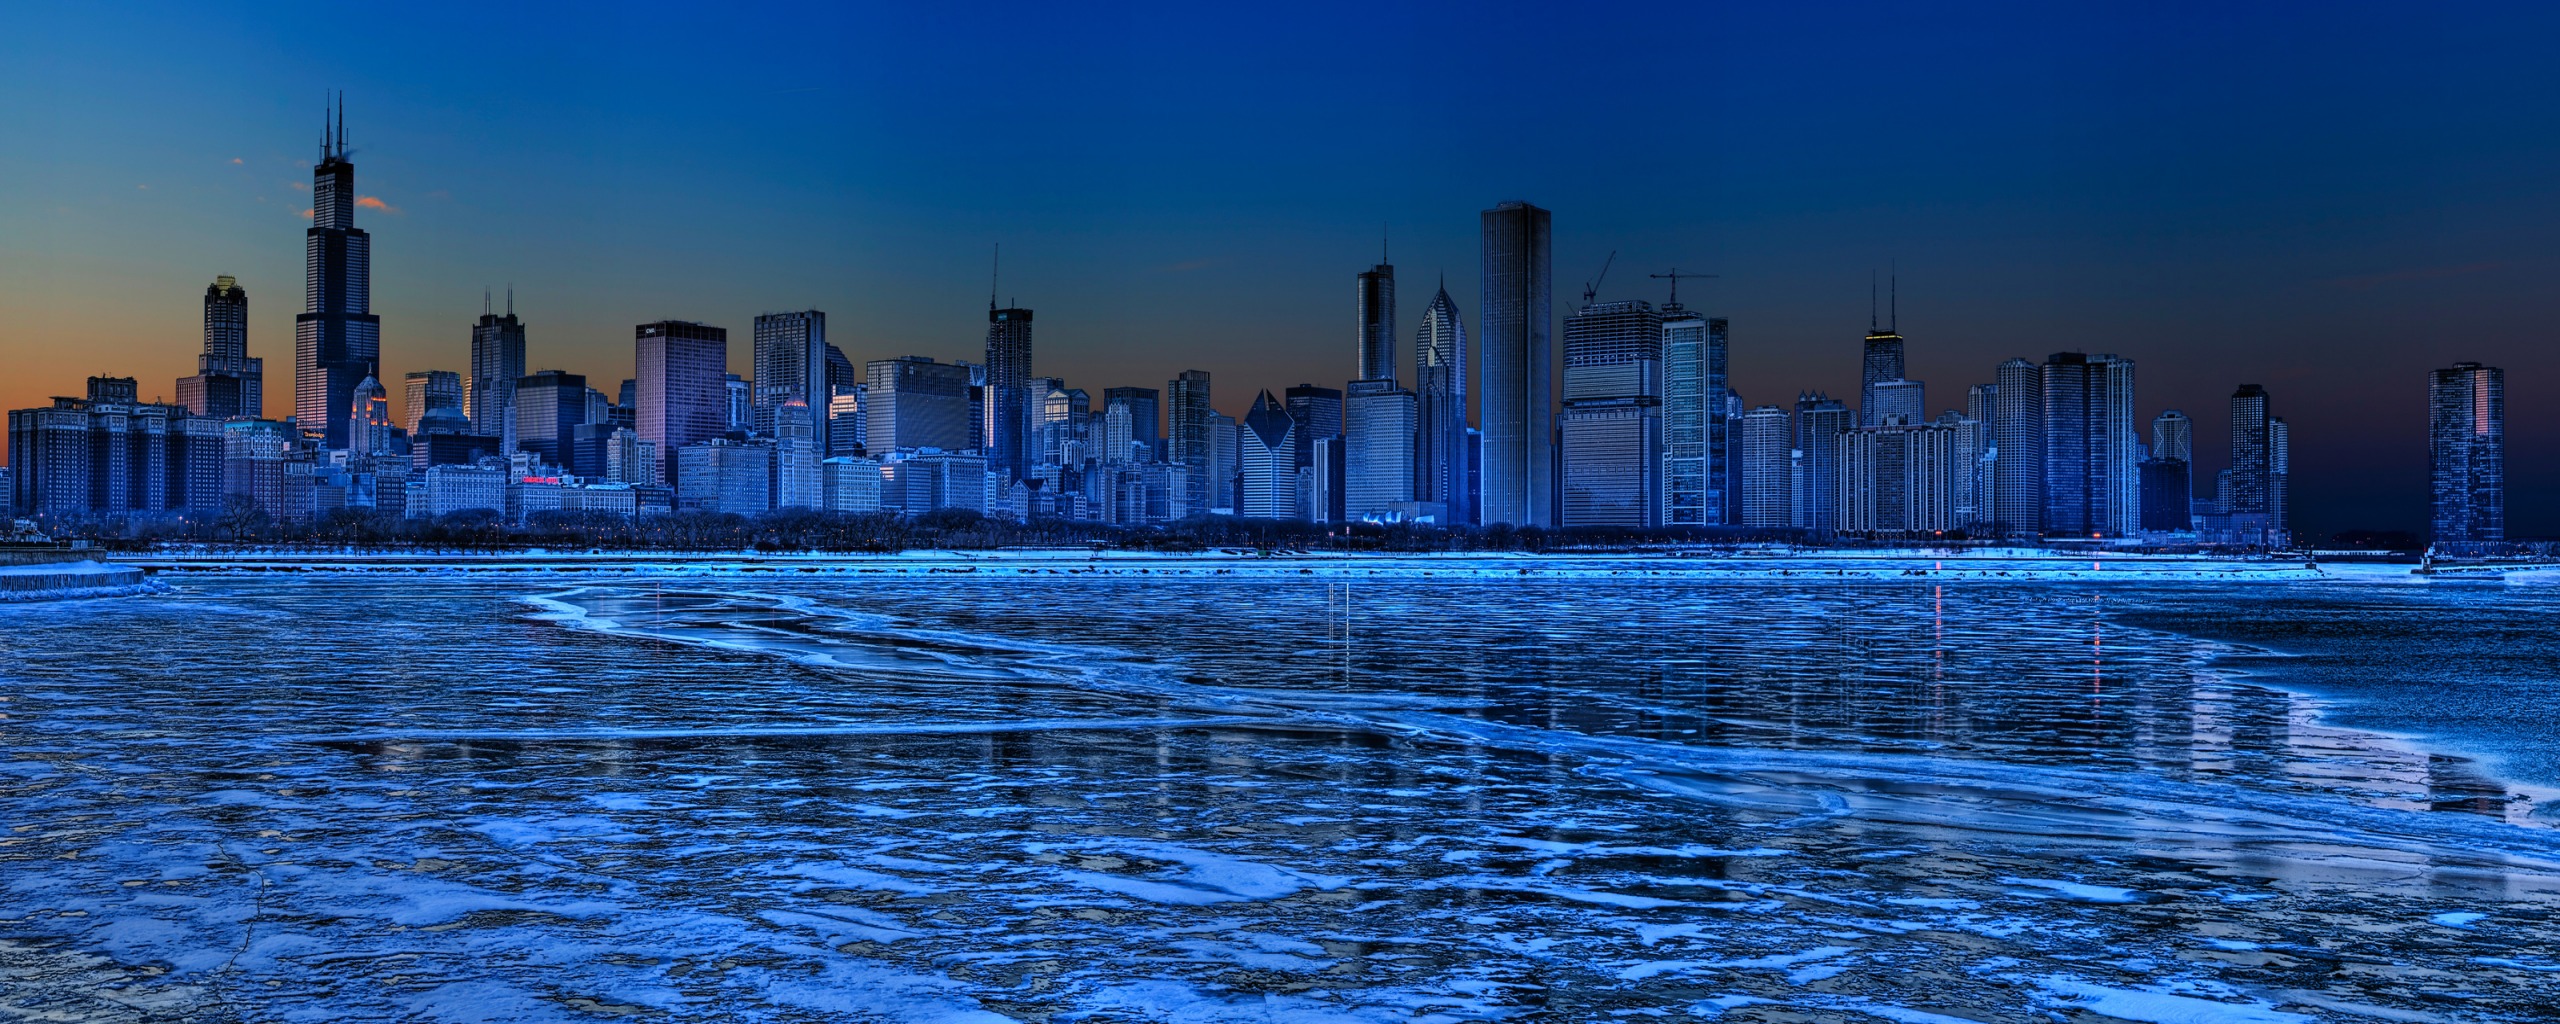 Monitor Wallpaper Background Widescreen HD Chicago